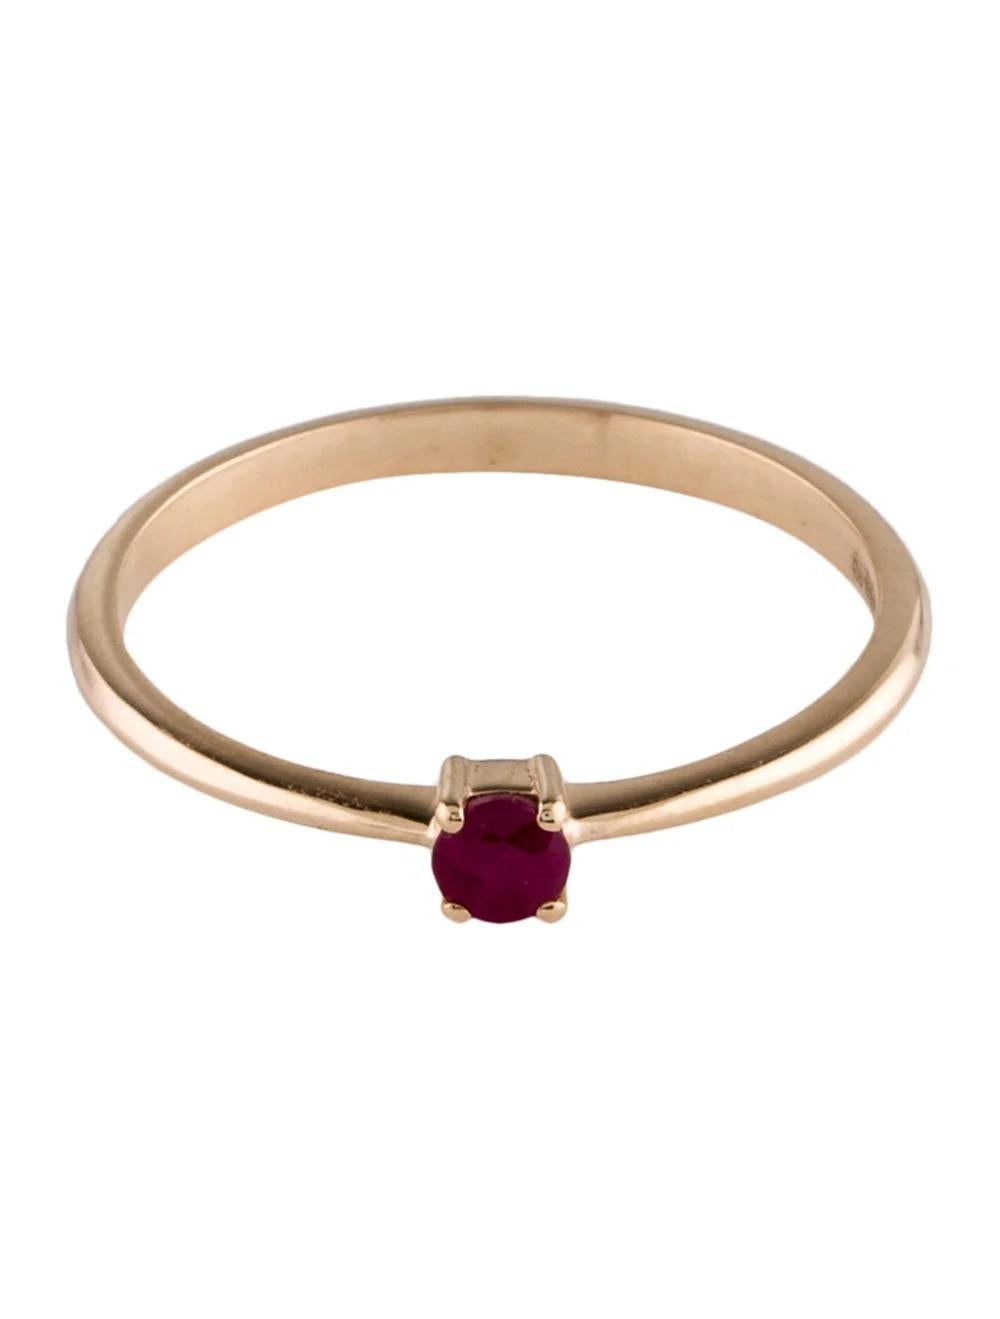 Round Cut 14K Ruby Band Ring Size 6.75 - Classic Design, Red Gemstones, Timeless Style For Sale